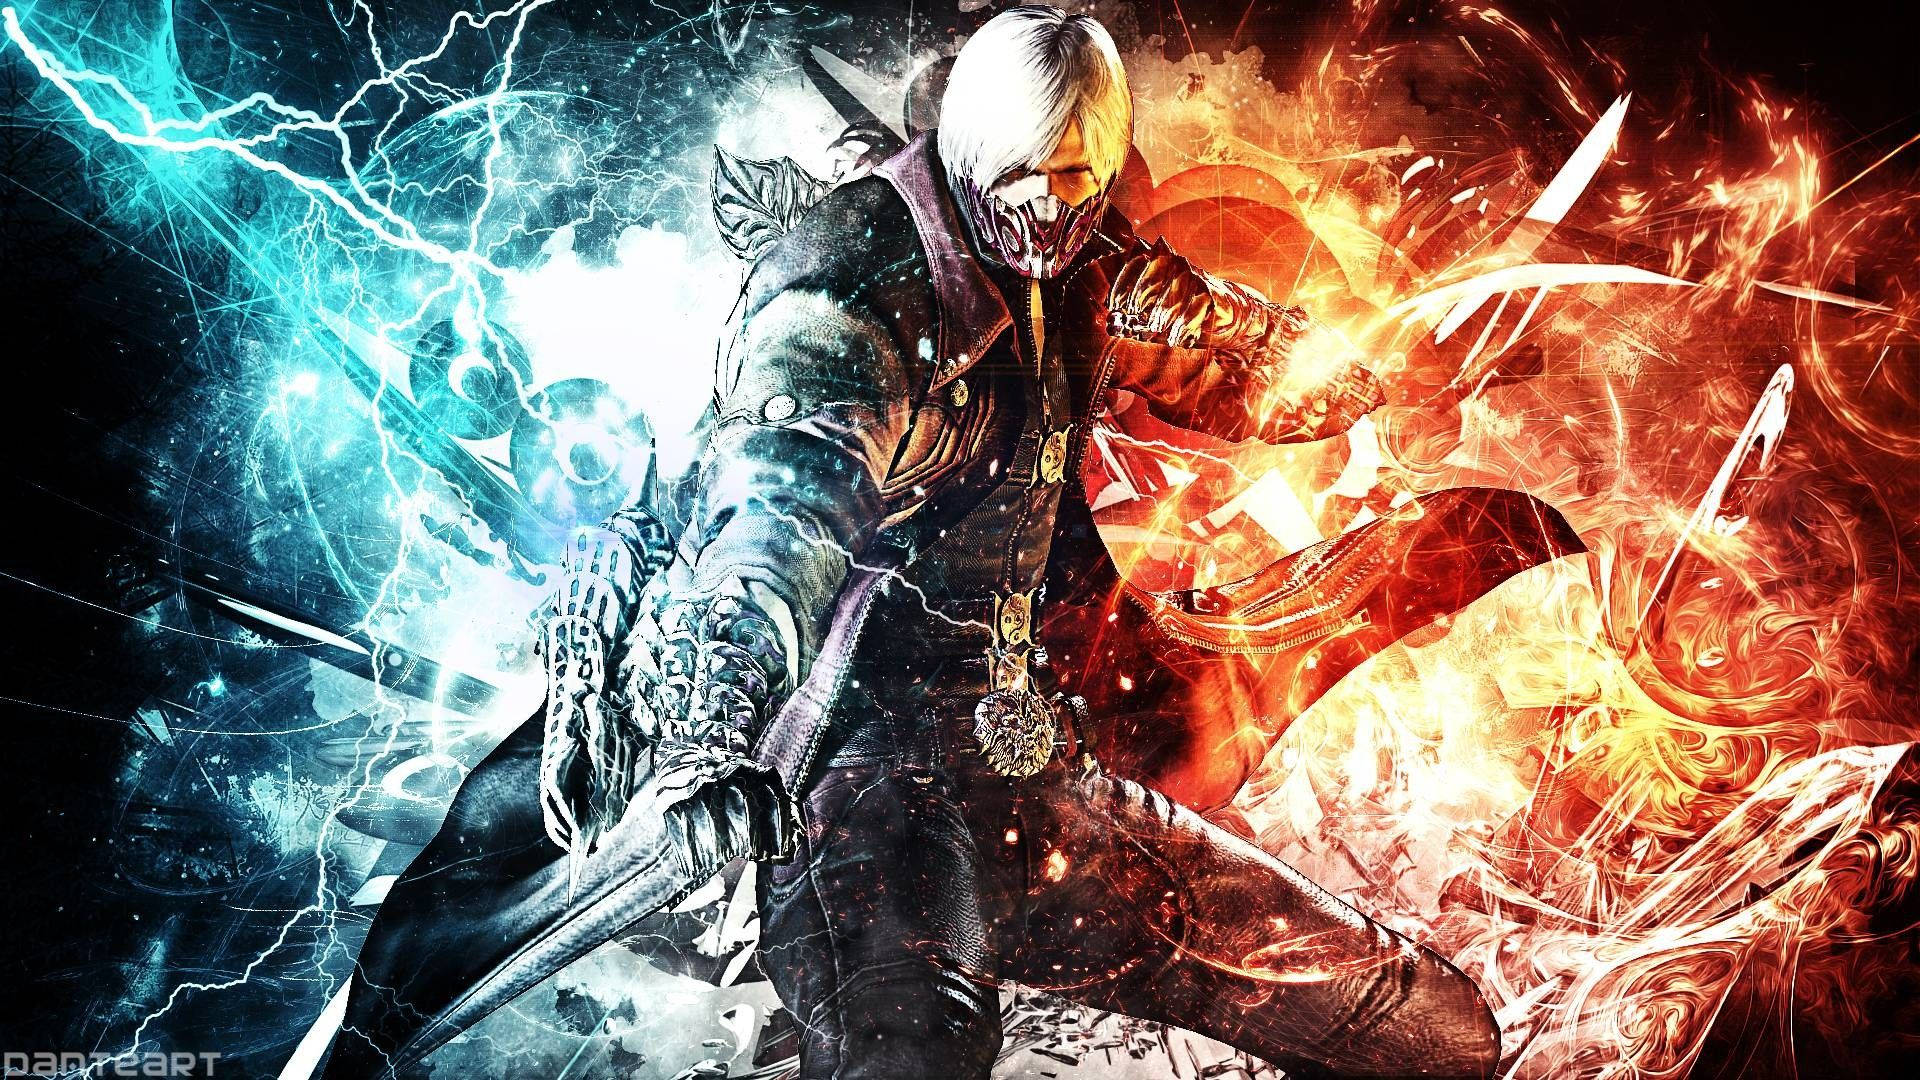 Free Devil May Cry 5 Wallpaper Downloads, [100+] Devil May Cry 5 Wallpapers  for FREE 